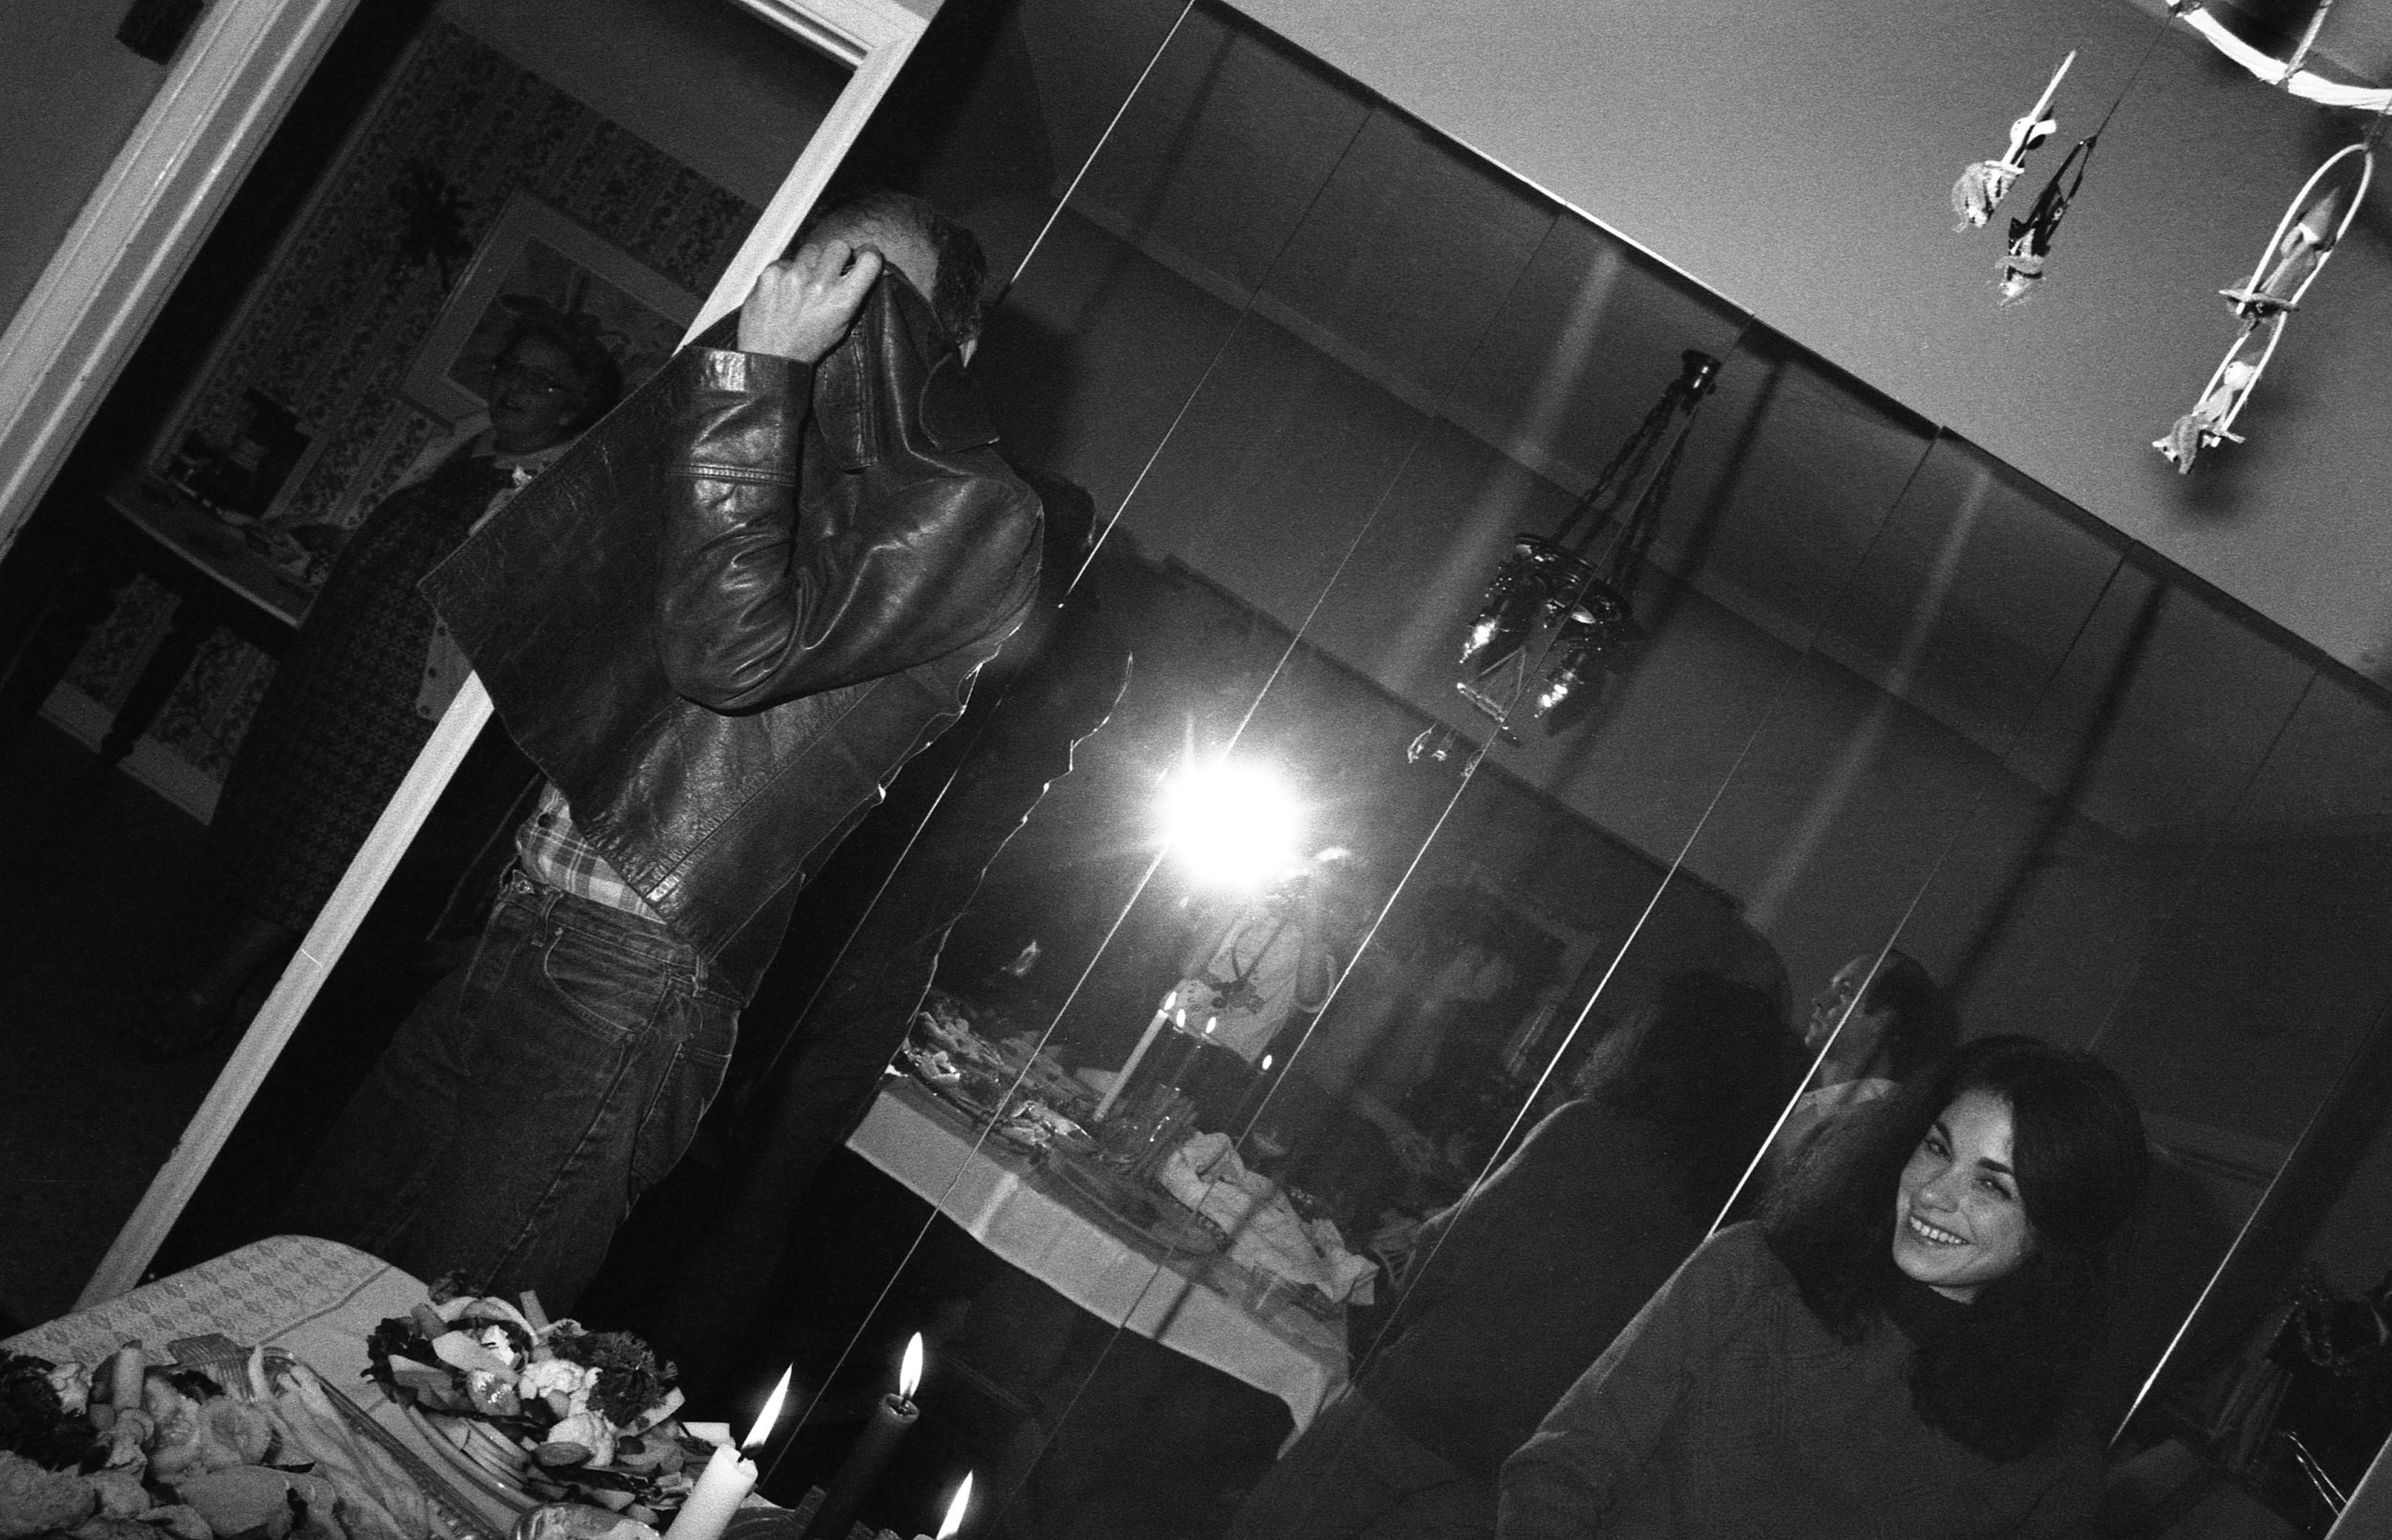 Los Angeles, December, 1981. Left to right: Sophie Youdelman, Randall Mason, Douglas Oliver (reflected in mirror), unknown woman.